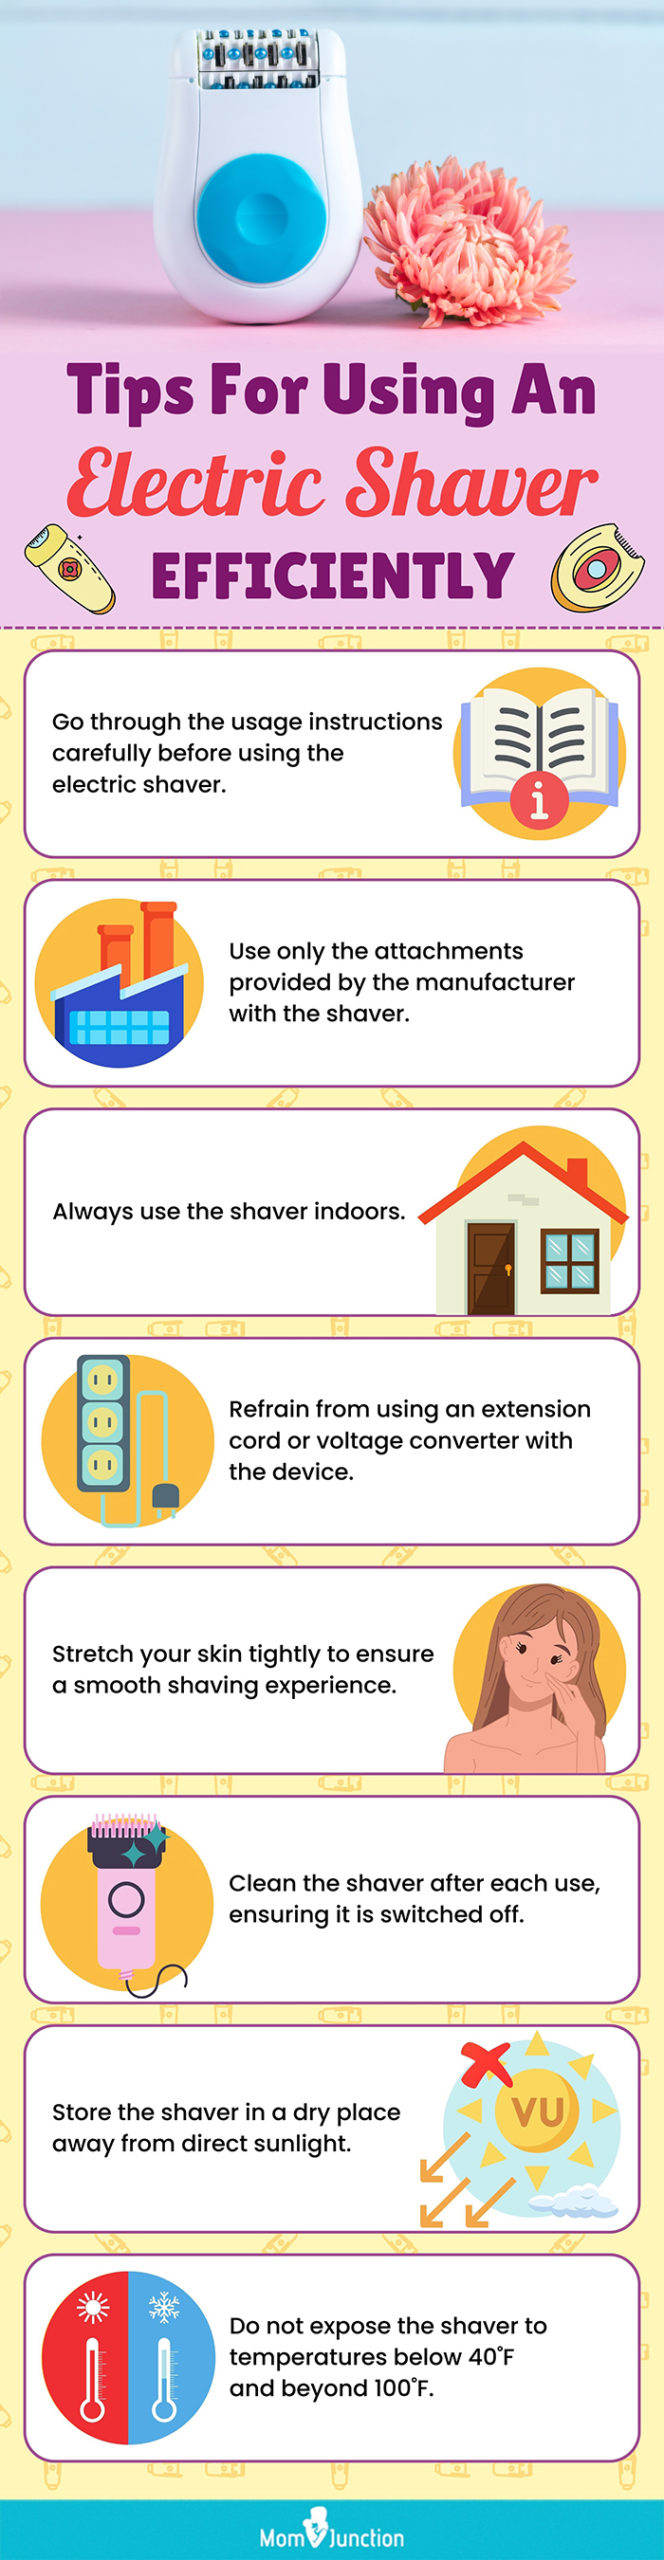 Tips For Using An Electric Shaver Efficiently (infographic)